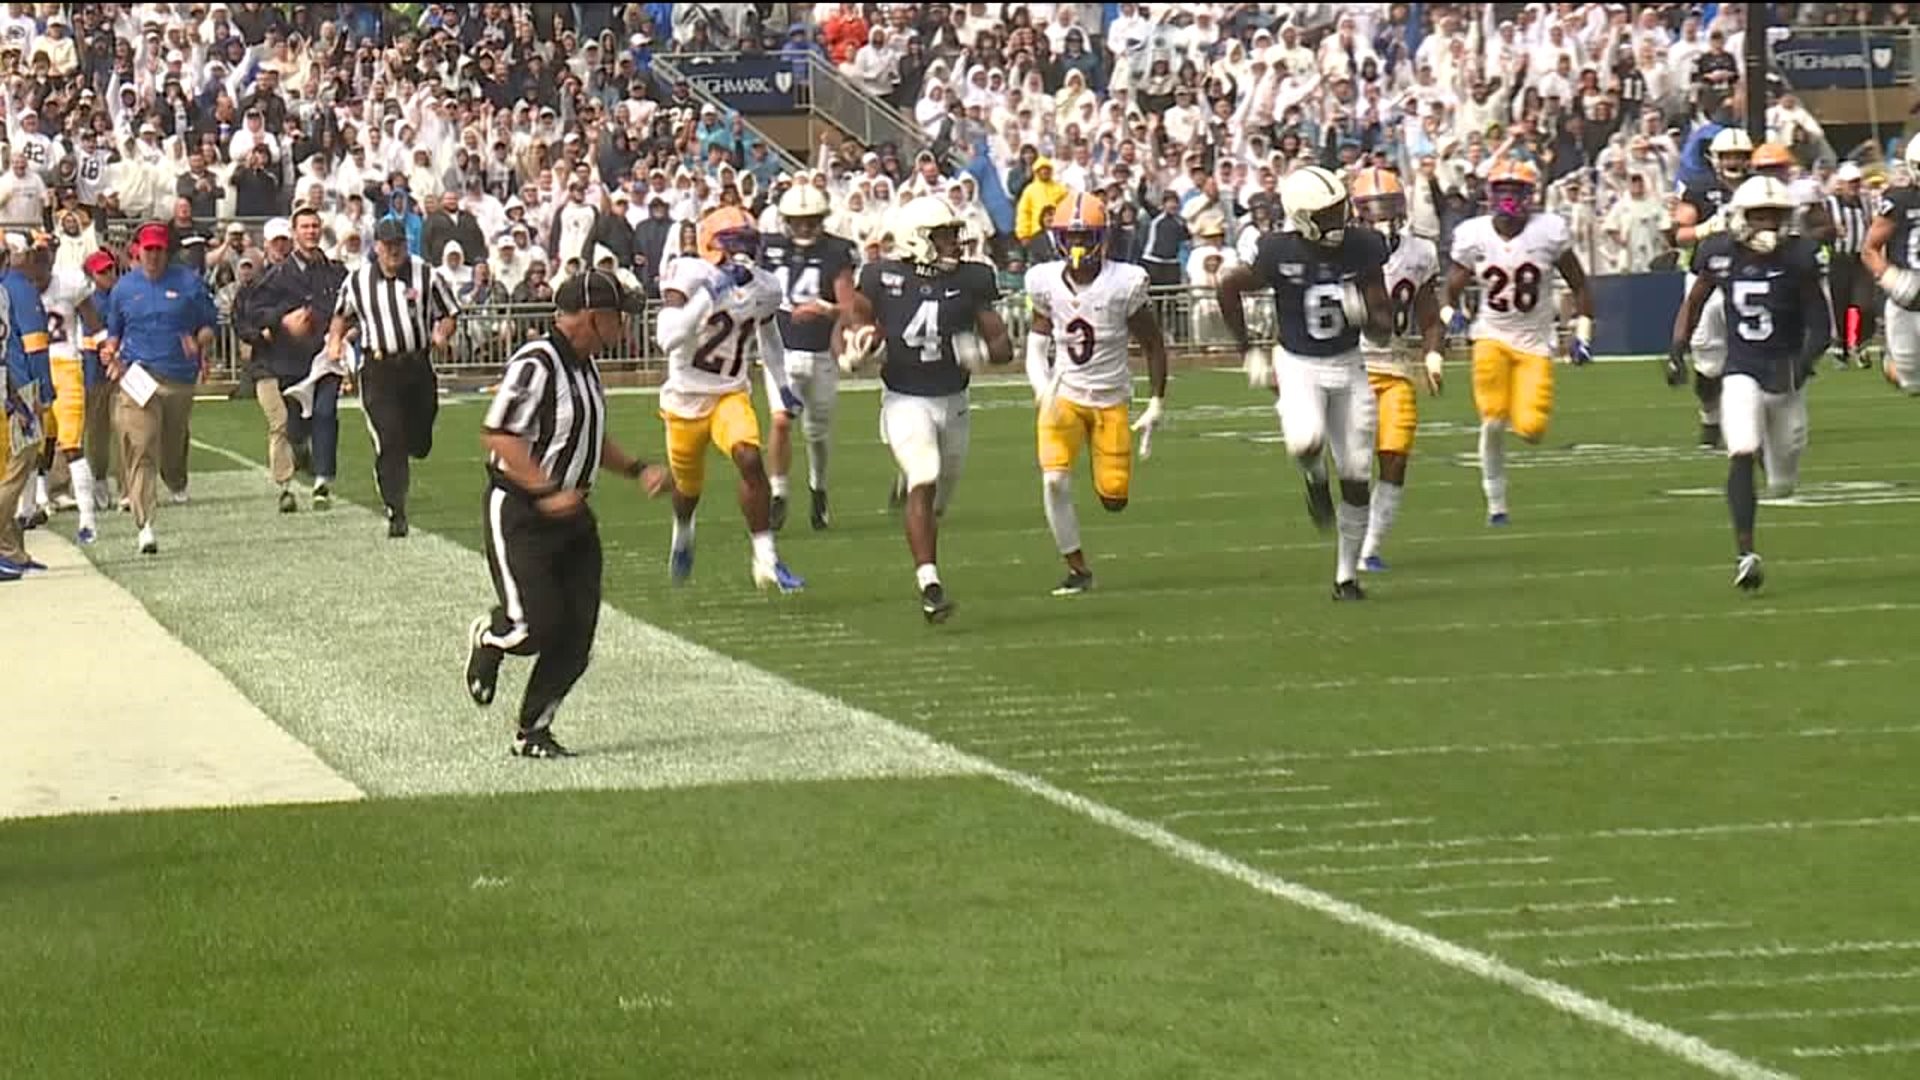 End of the Penn State - Pitt Rivalry